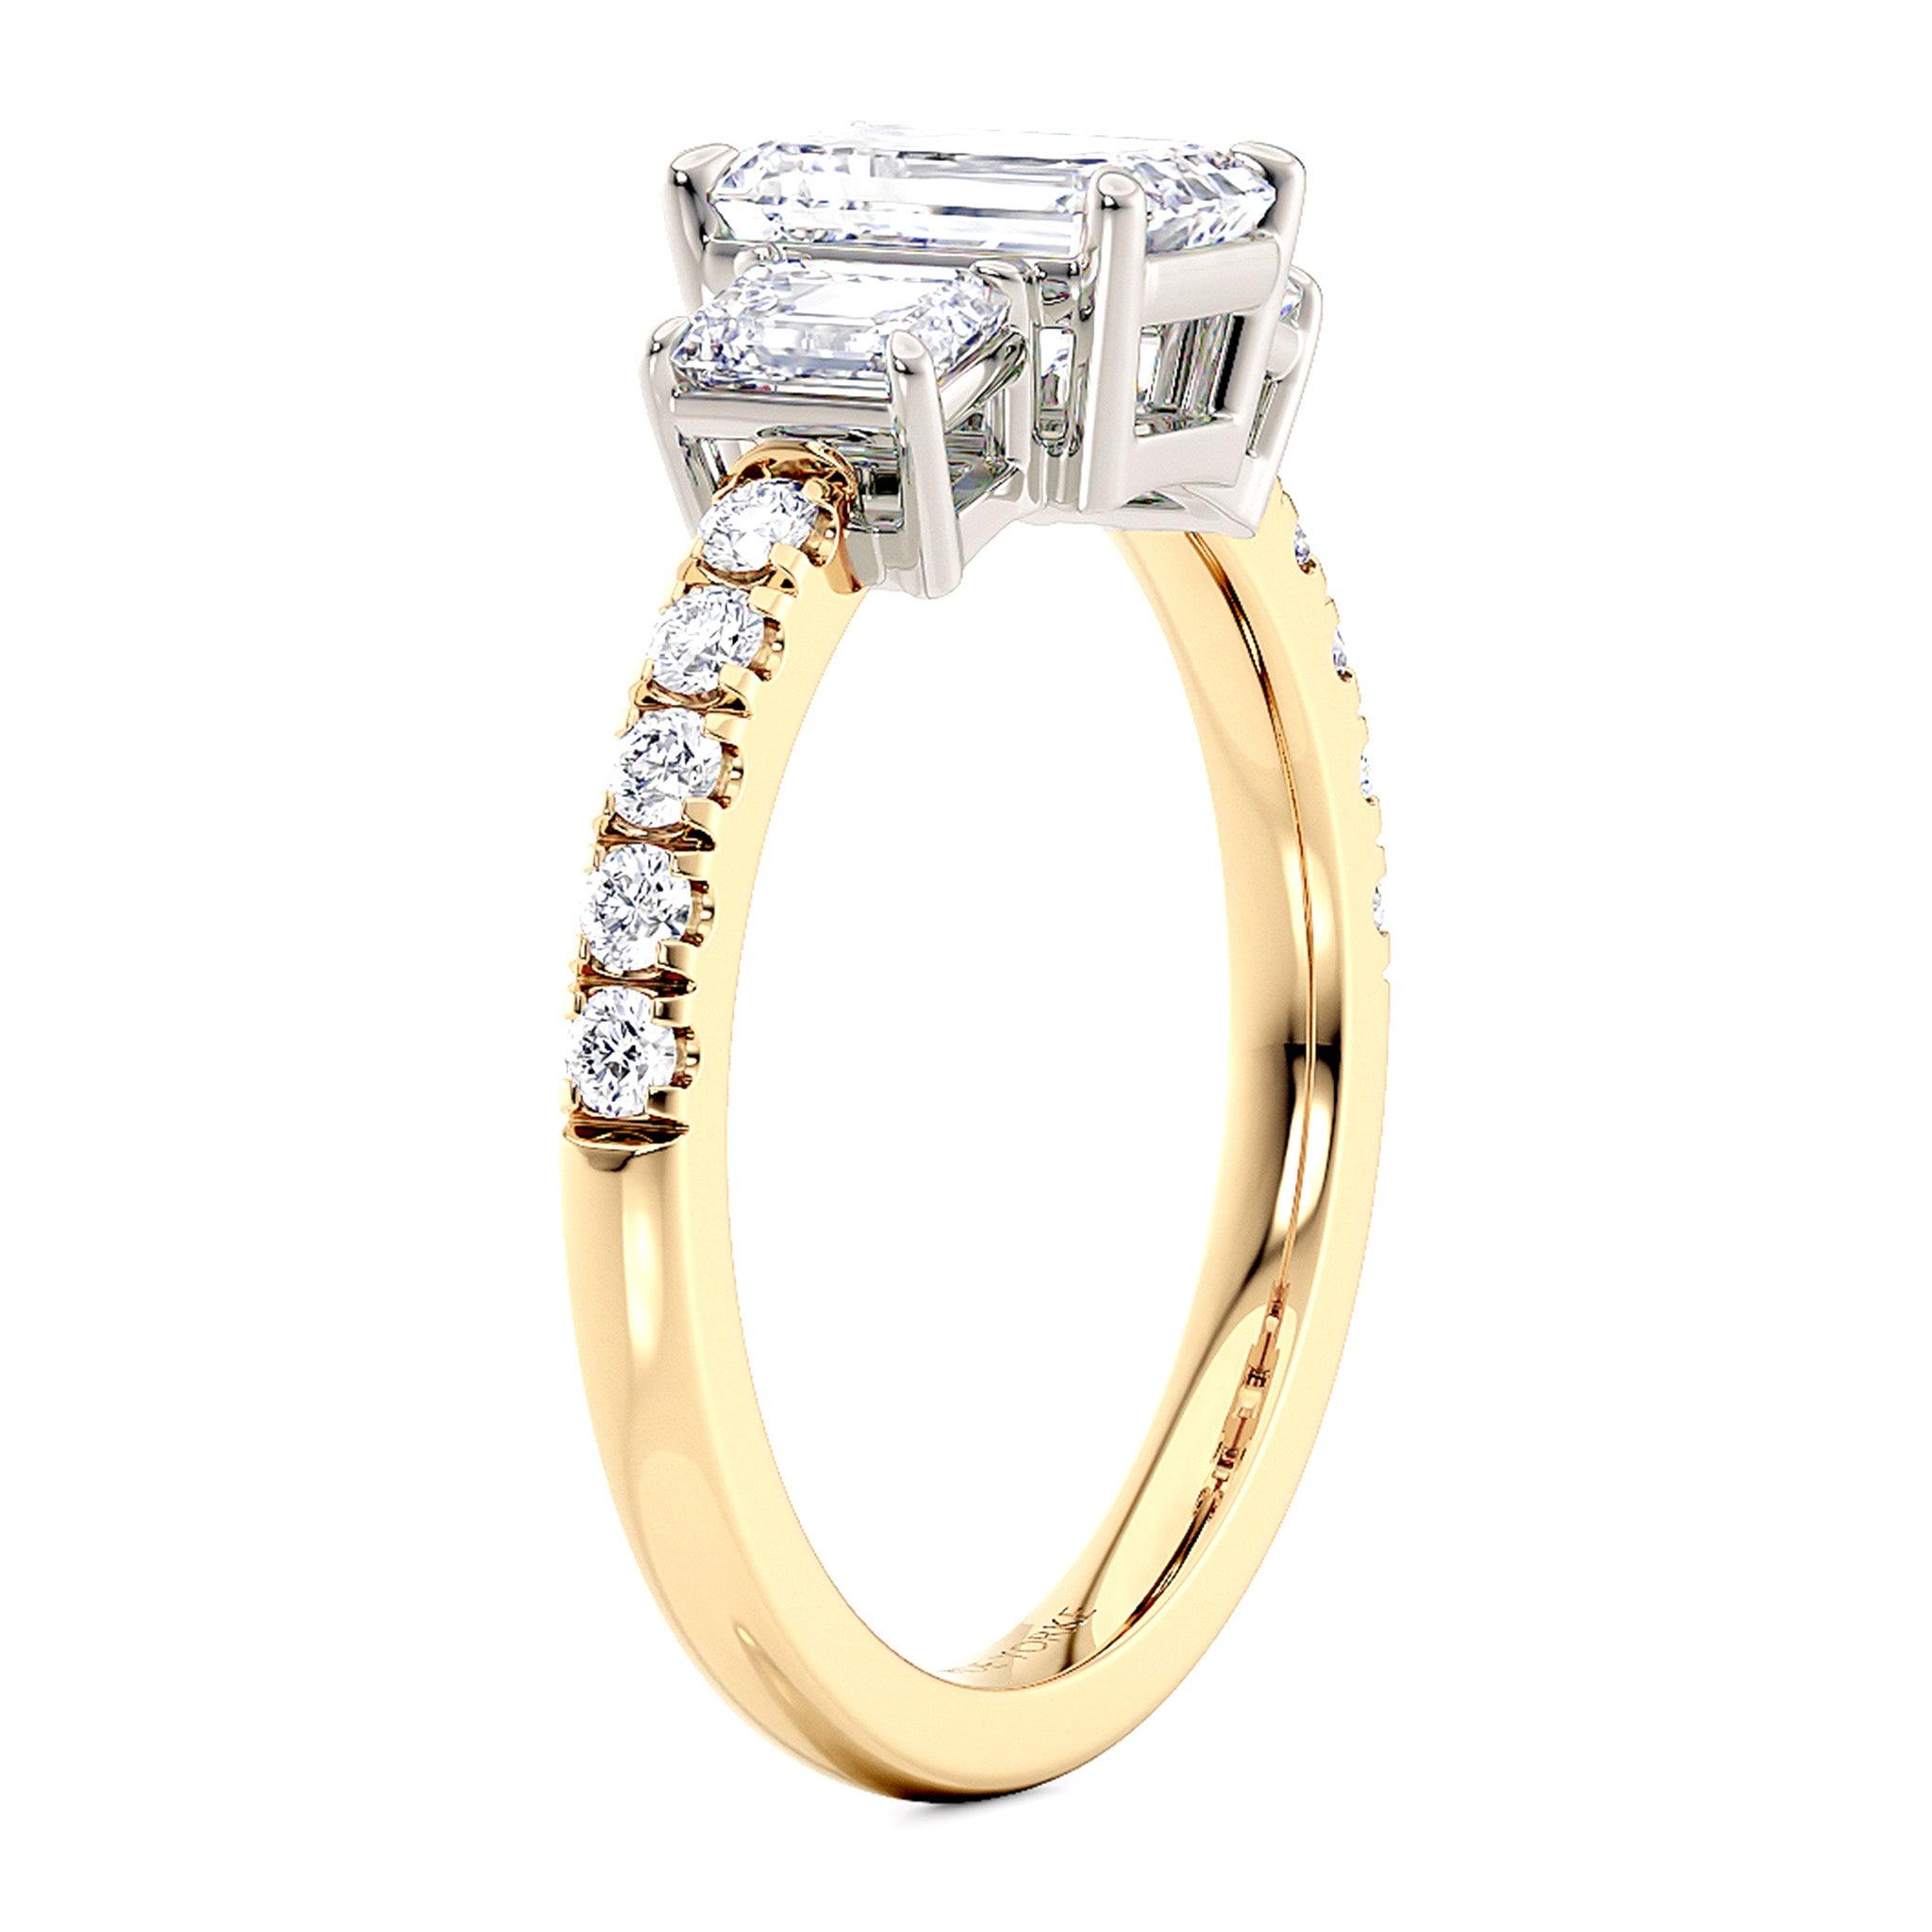 Adele emerald cut diamond three stone ring in gold with diamonds on the band